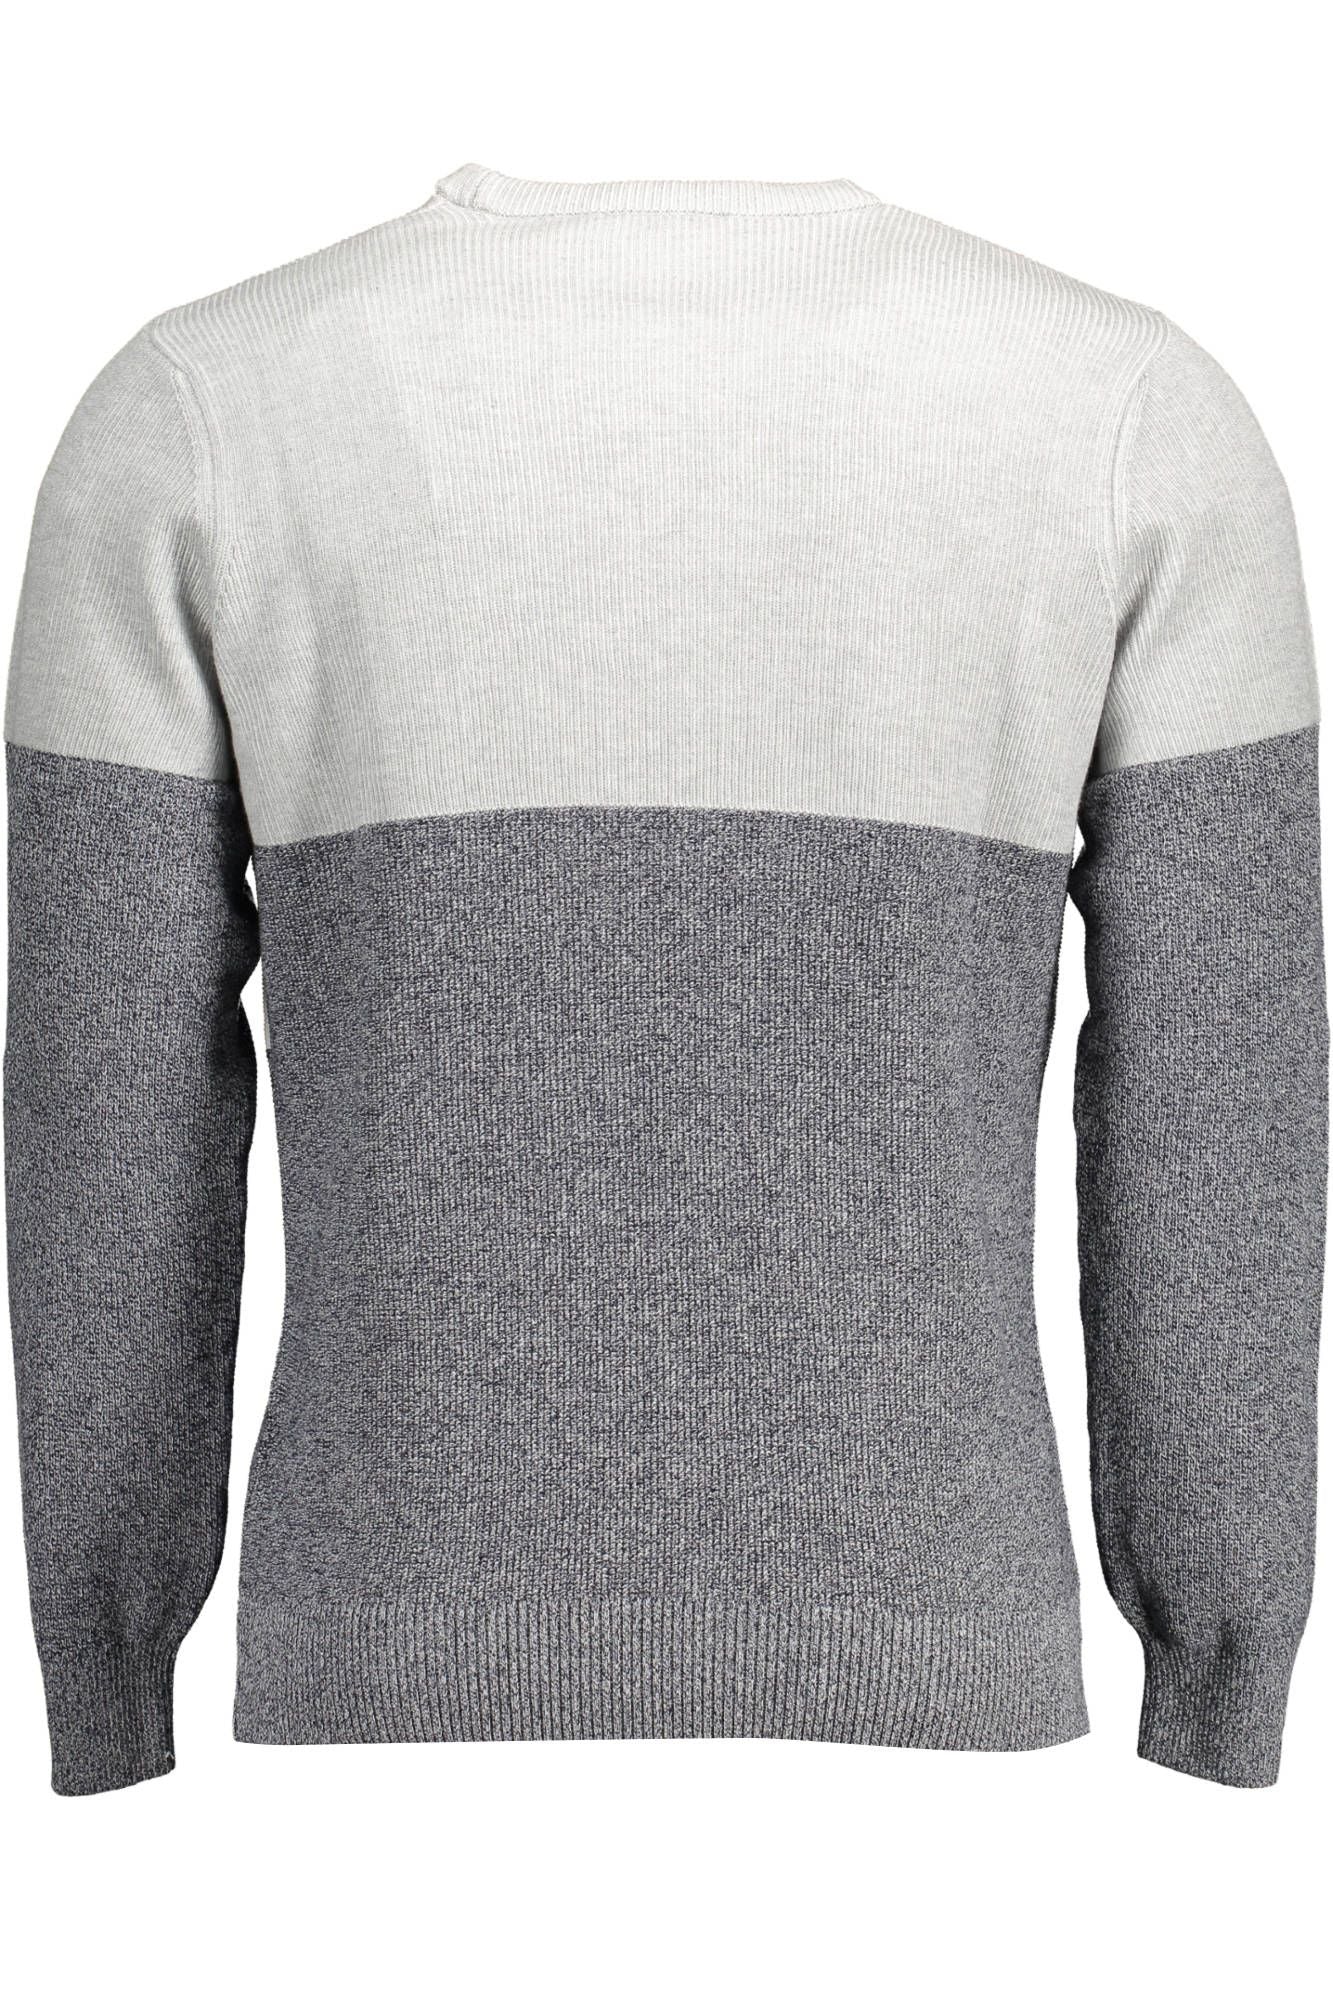 Chic Gray Contrast Detail Round Neck Sweater